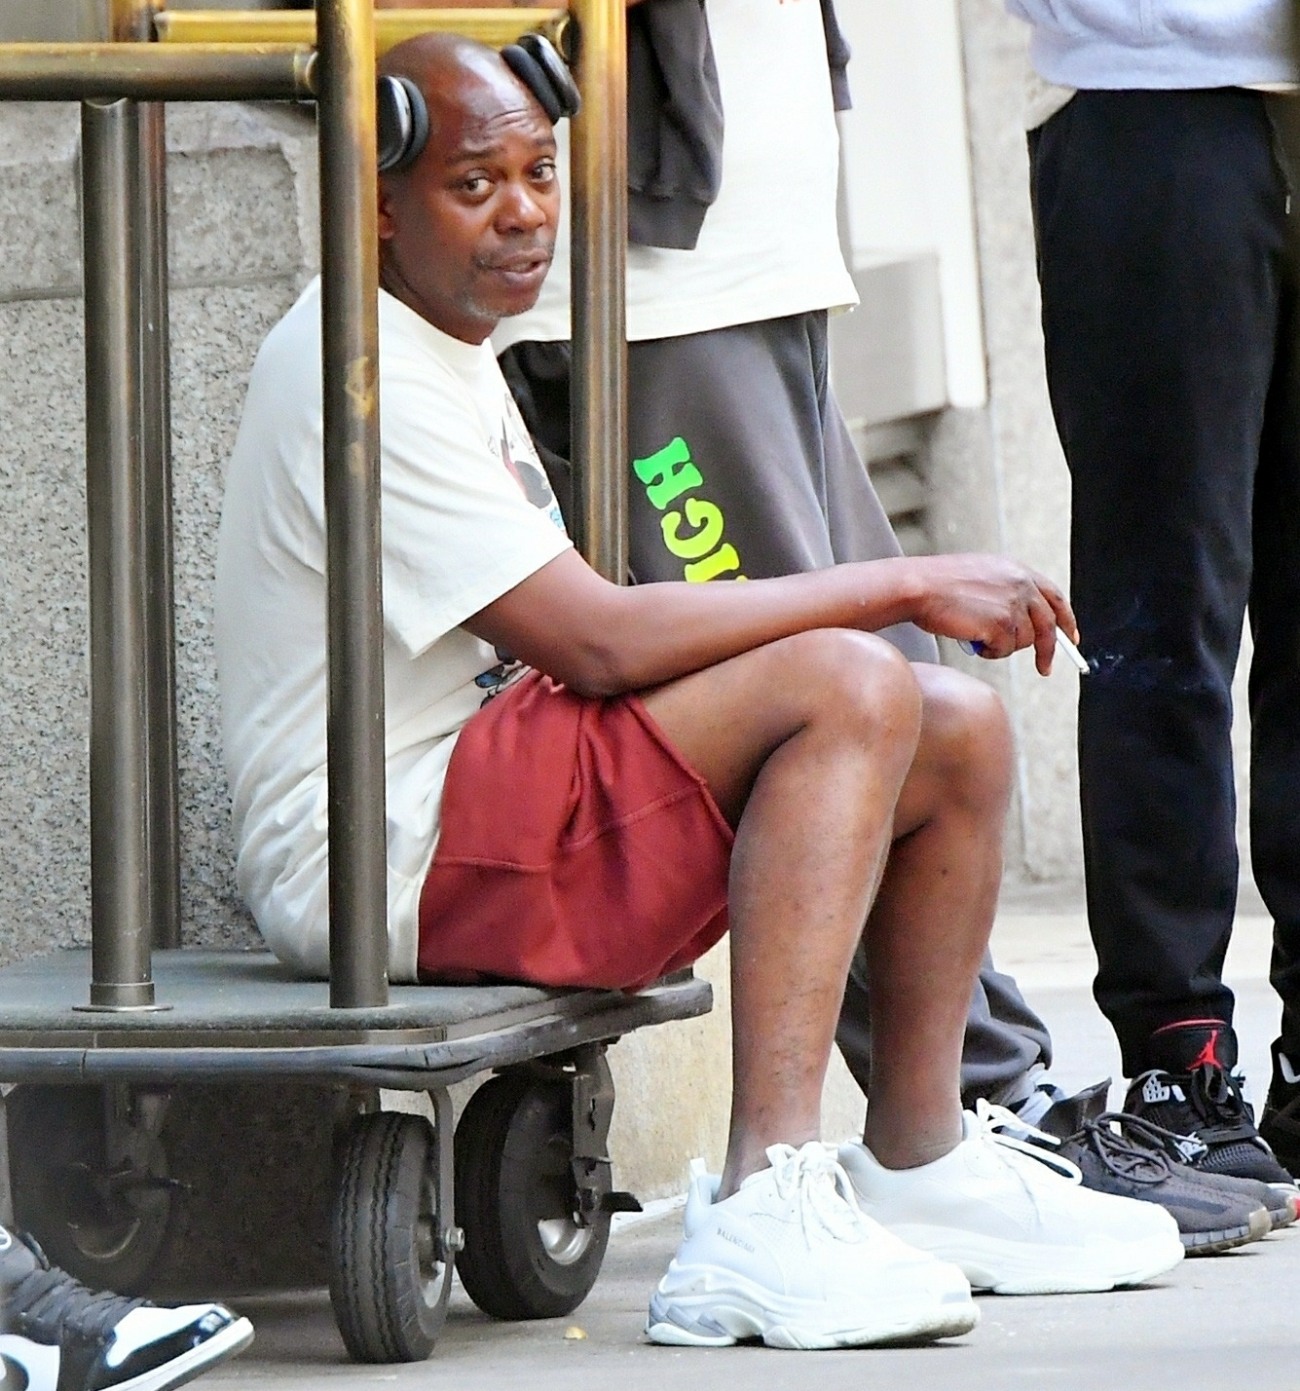 Dave Chappelle has a laugh with friends while out in NYC